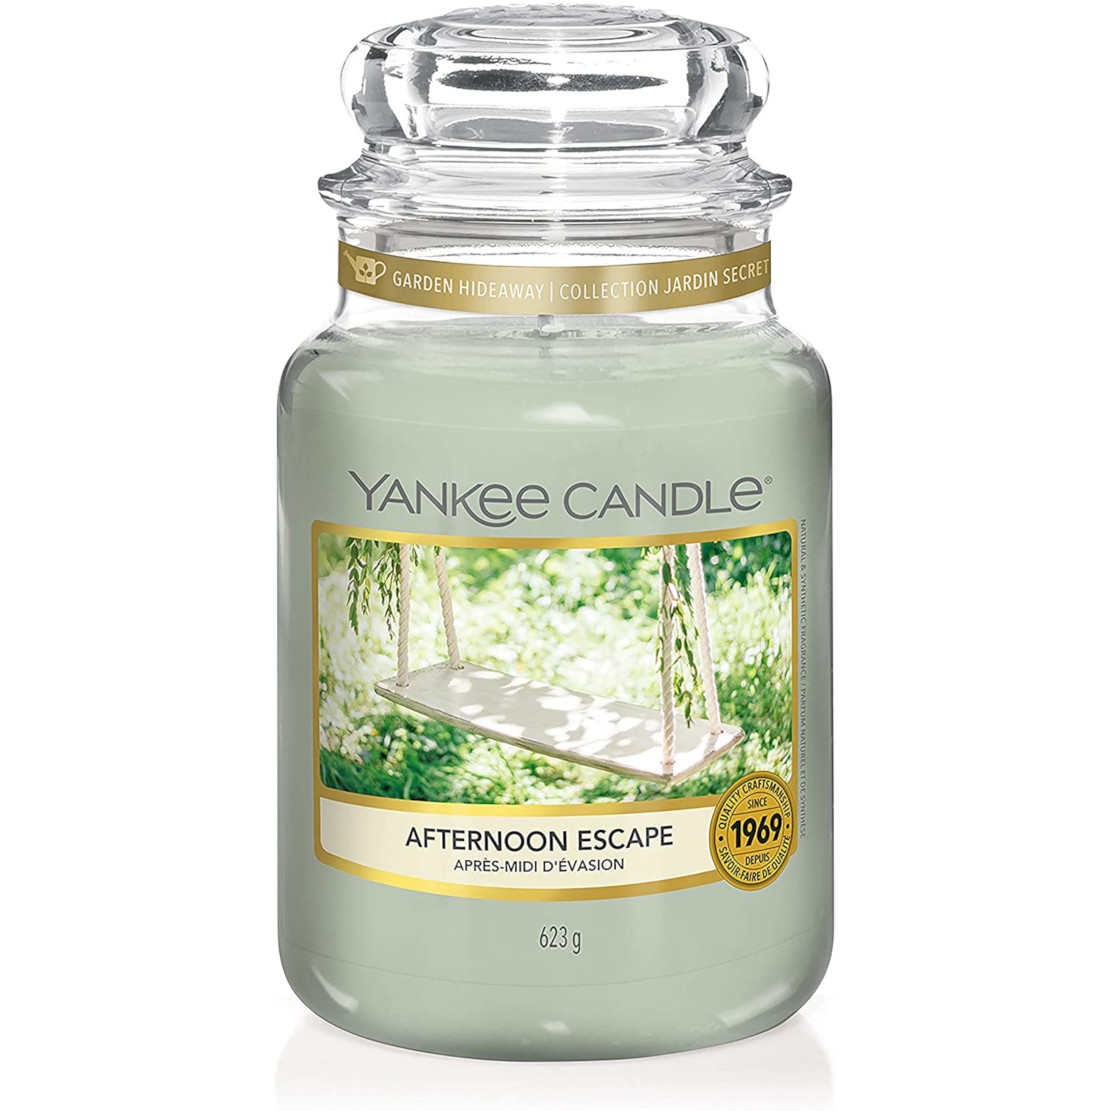 Yankee Candle Afternoon Escapes Large Jar